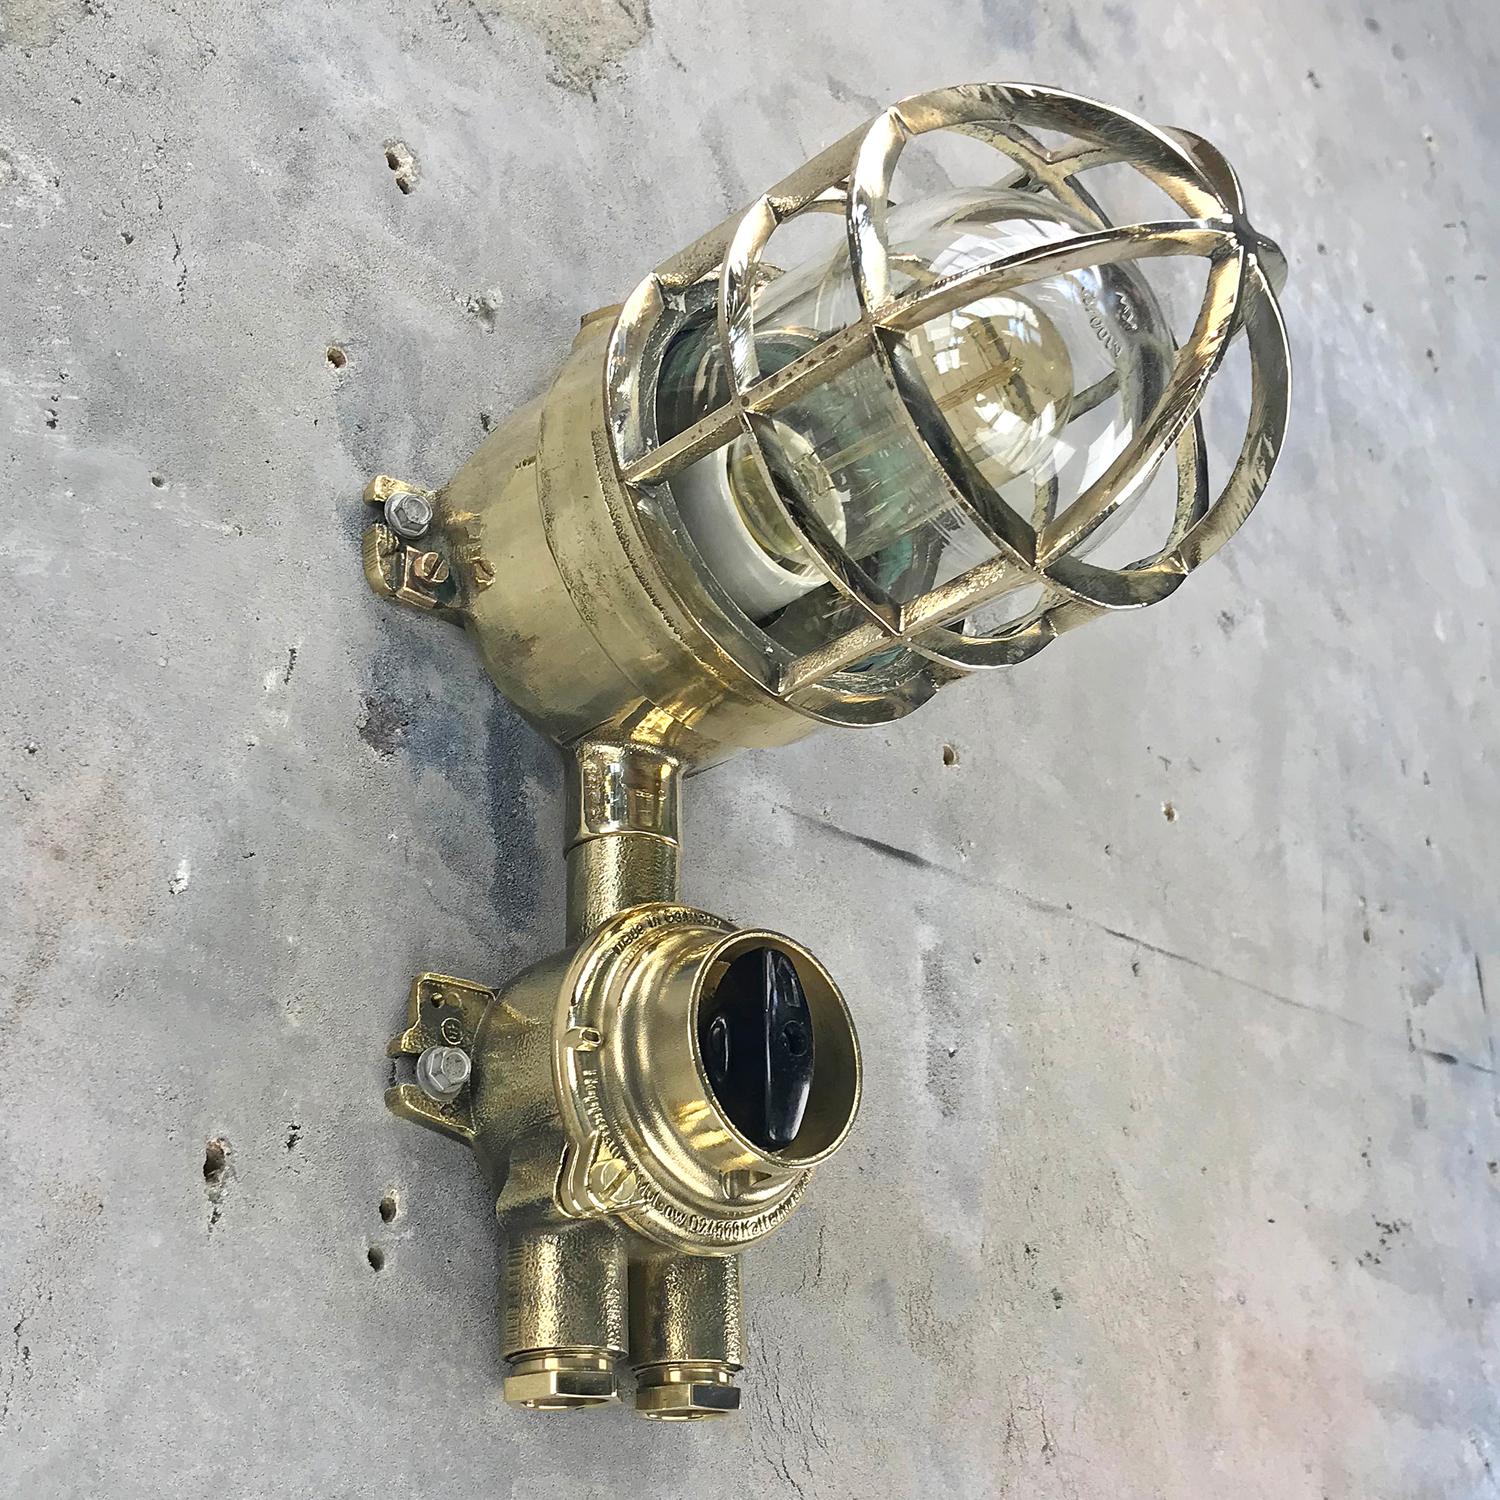 1970s German Explosion Proof Wall Light Cast Brass, Glass Shade & Rotary Switch For Sale 9